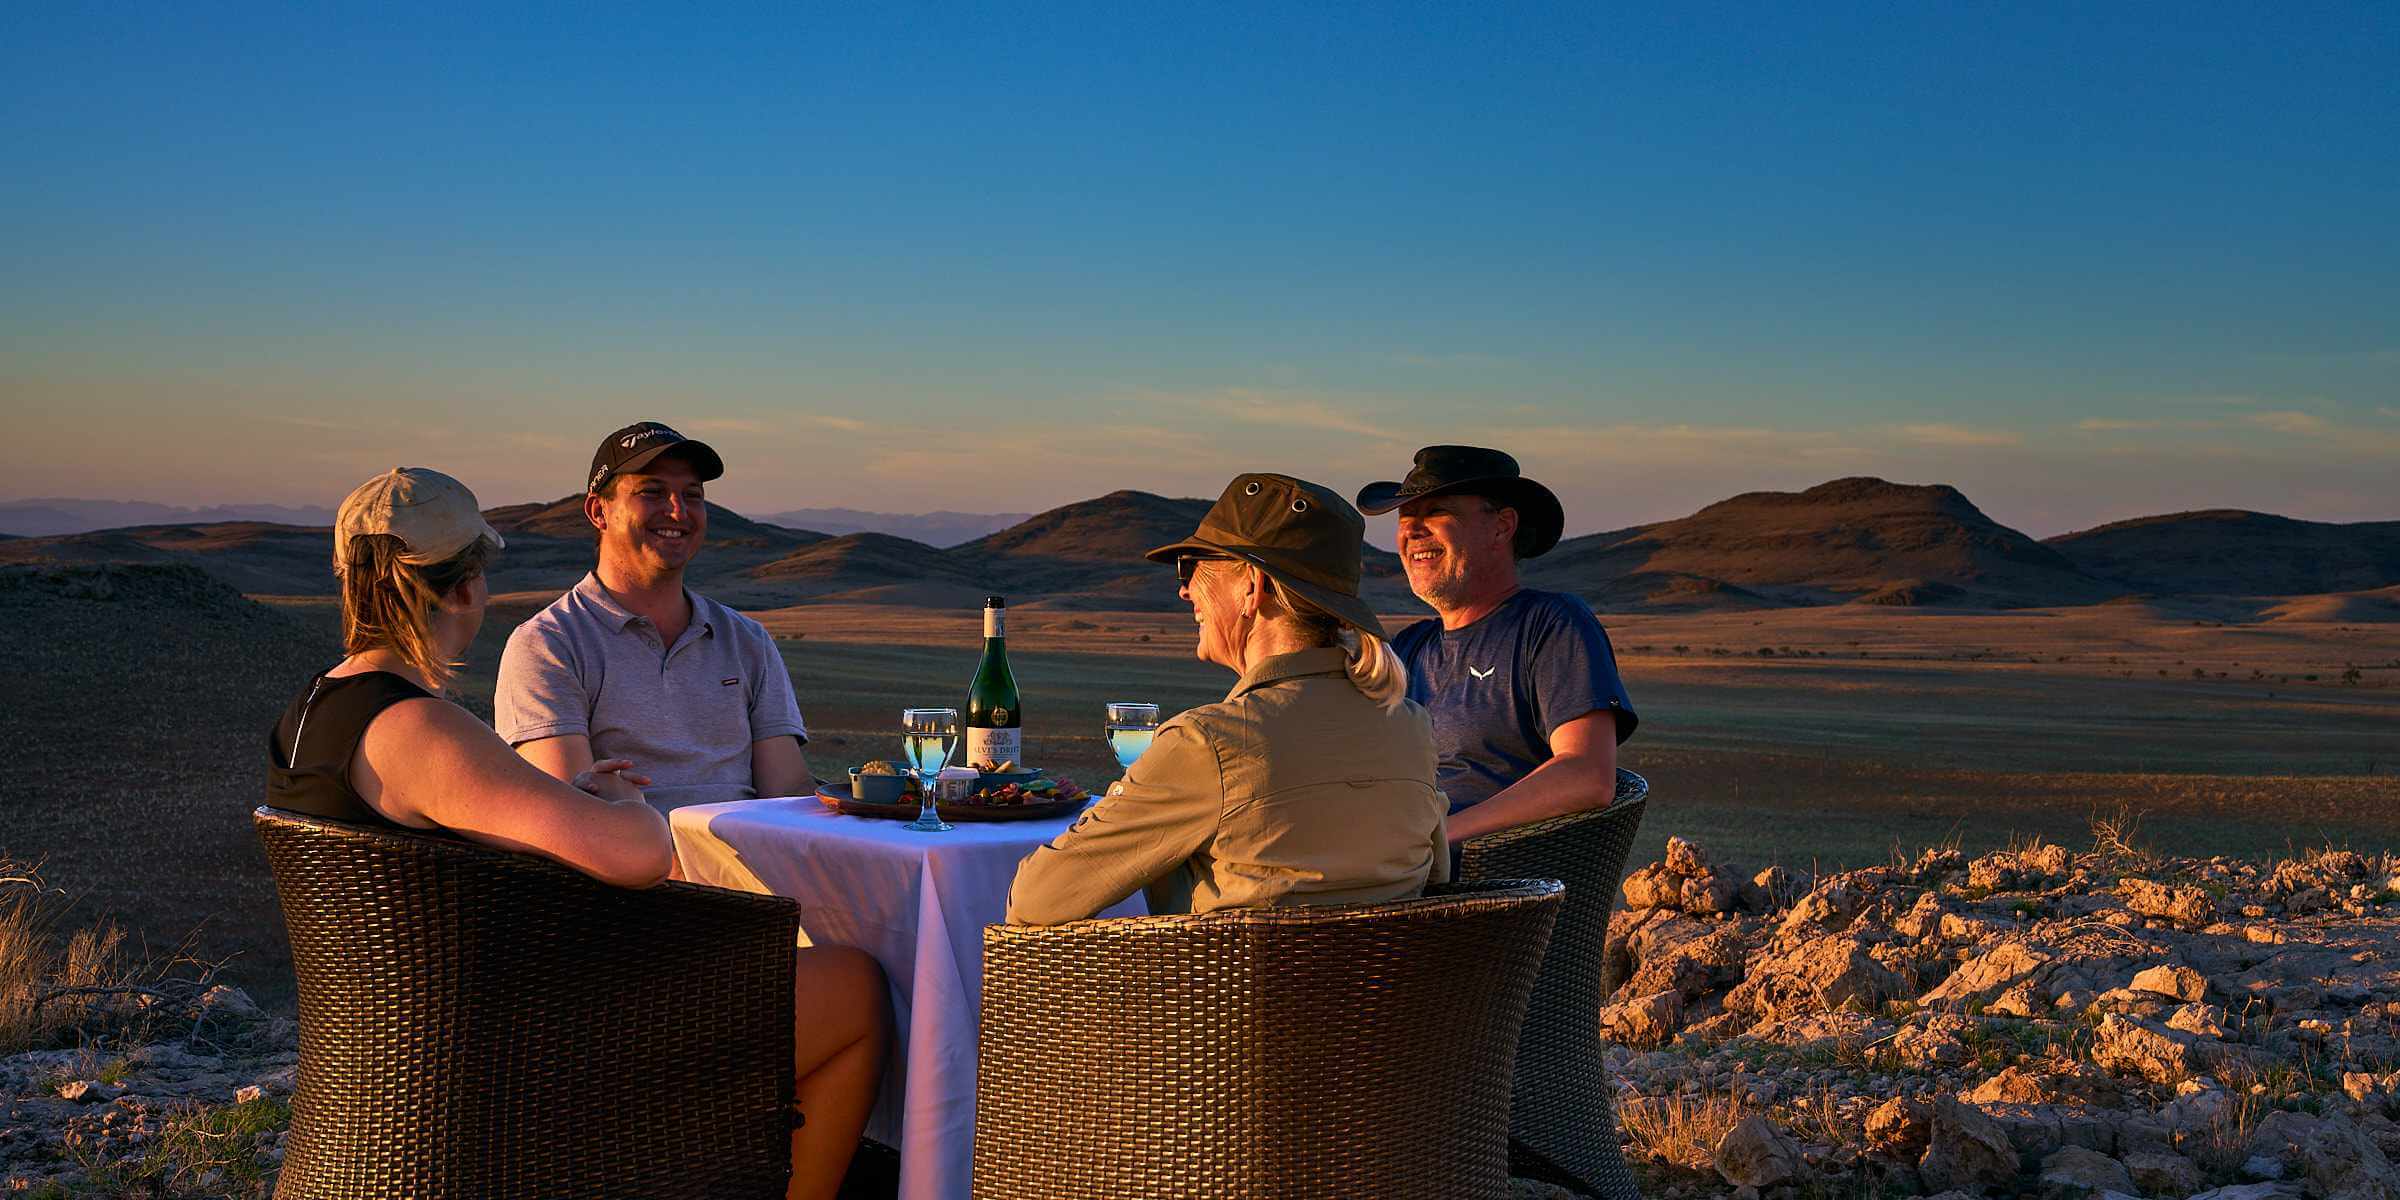 Sundowners amidst the pristine wilderness, the ideal end to an eventful day